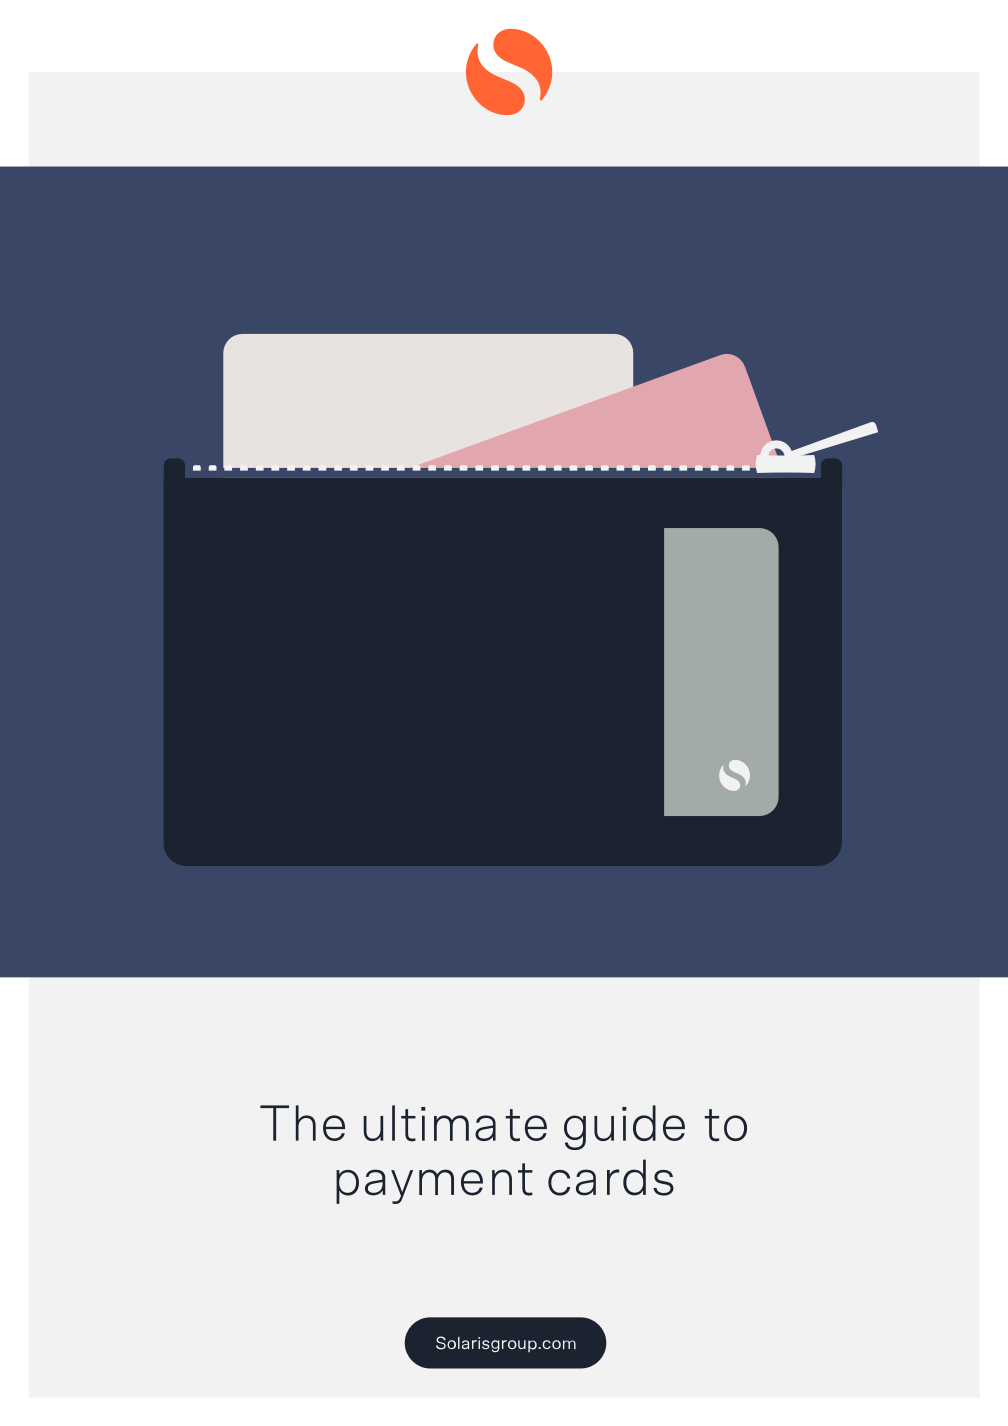 The ultimate guide to payment cards